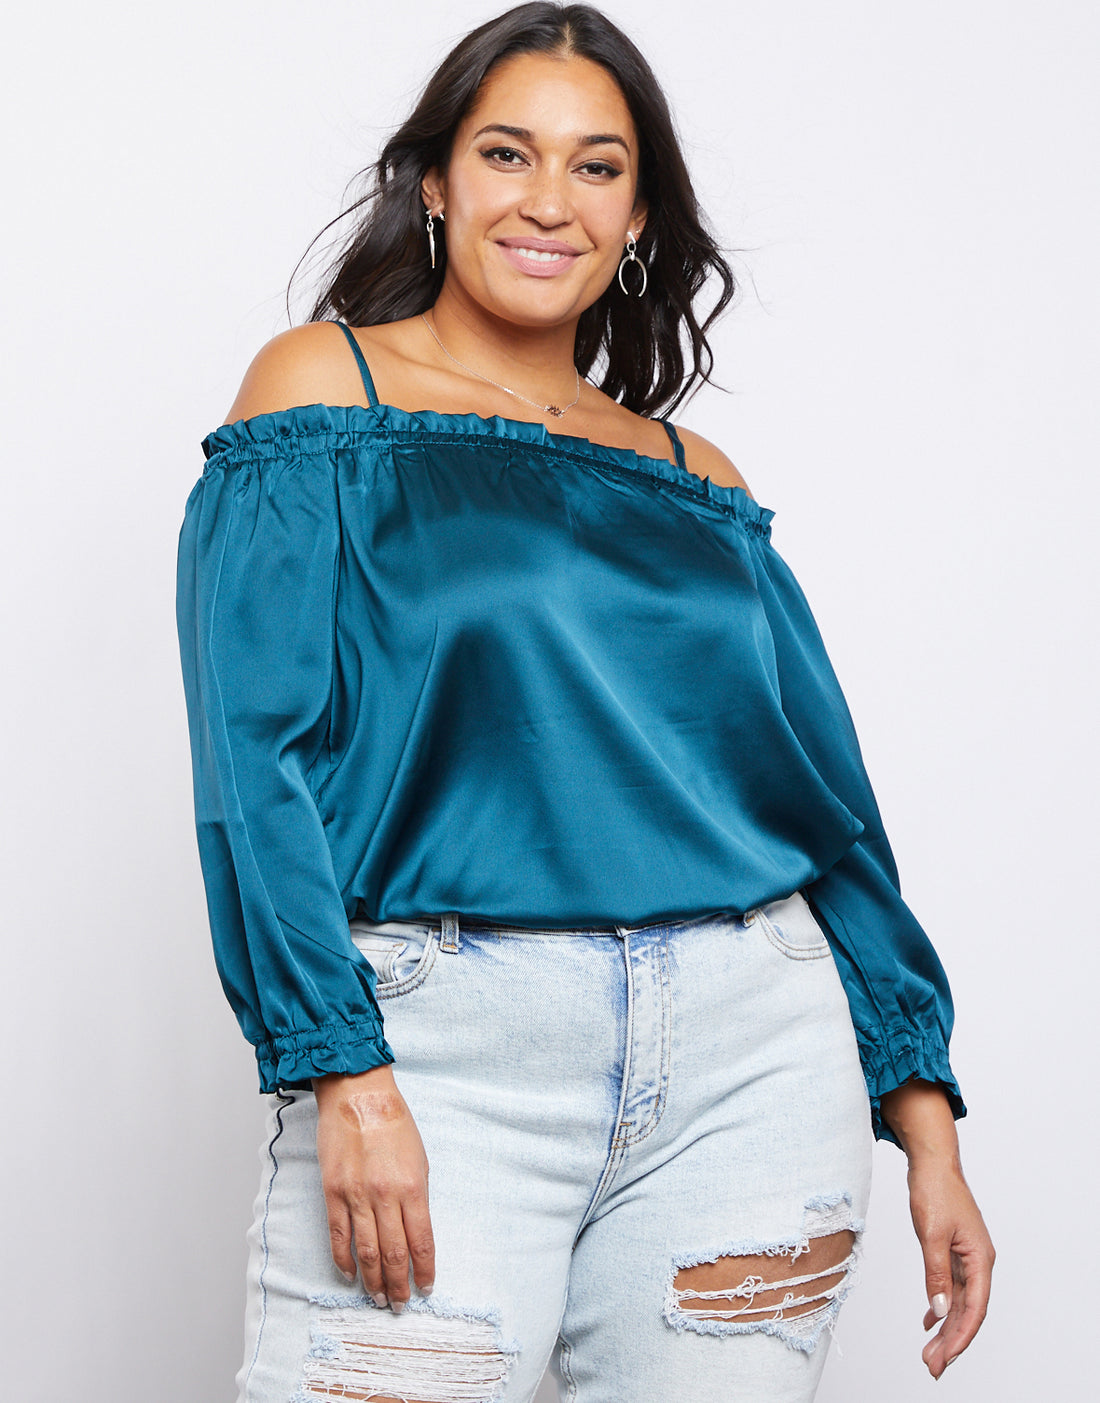 Curve Satin Ruffle Top Plus Size Tops Teal 1XL -2020AVE